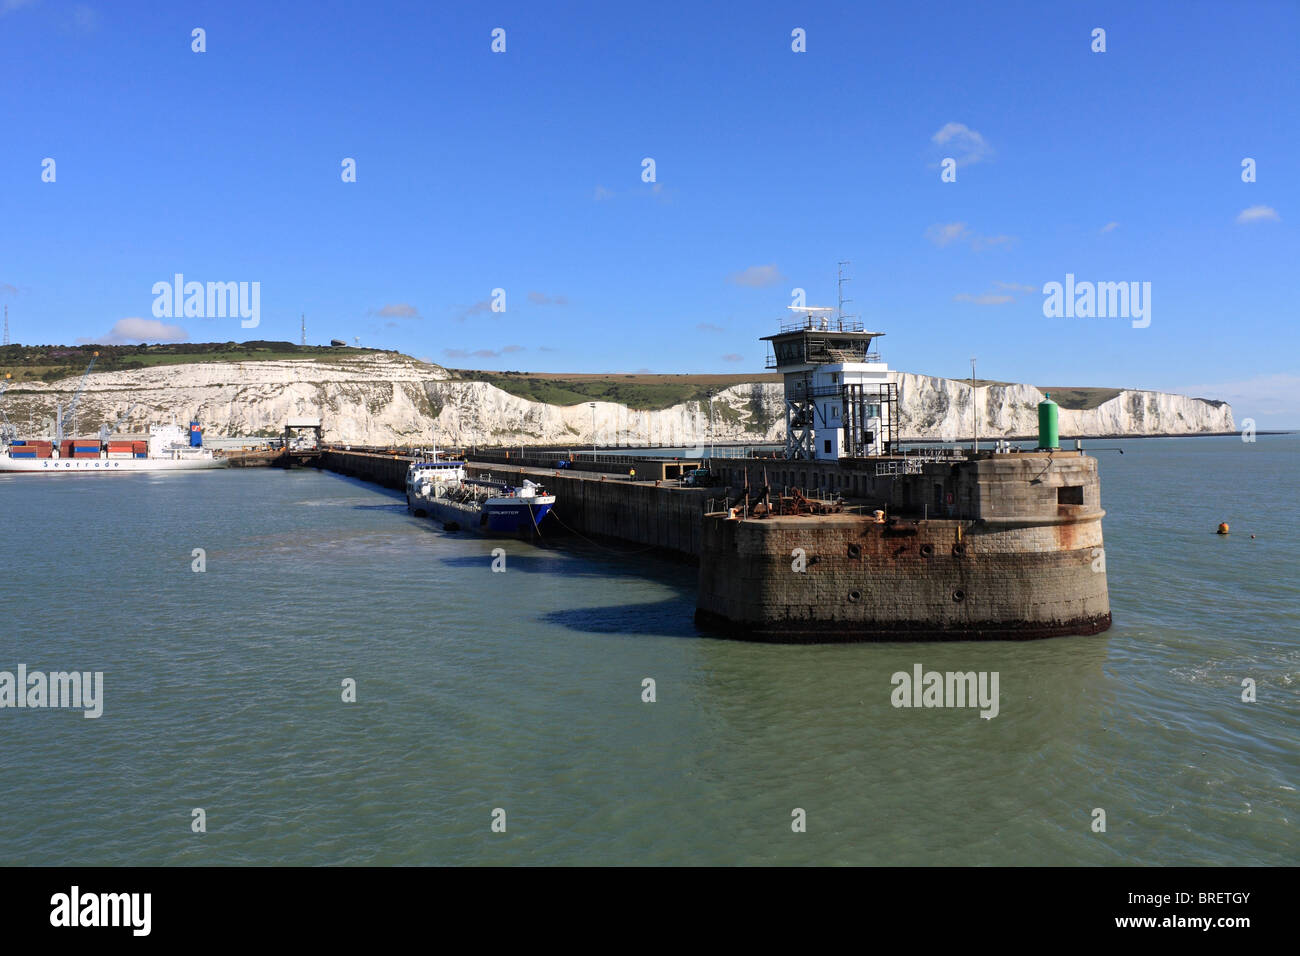 Views of the coastline of Dover and Calais, ferry ports and the English Channel from Sea France passenger ferry, Summer 2010. Stock Photo